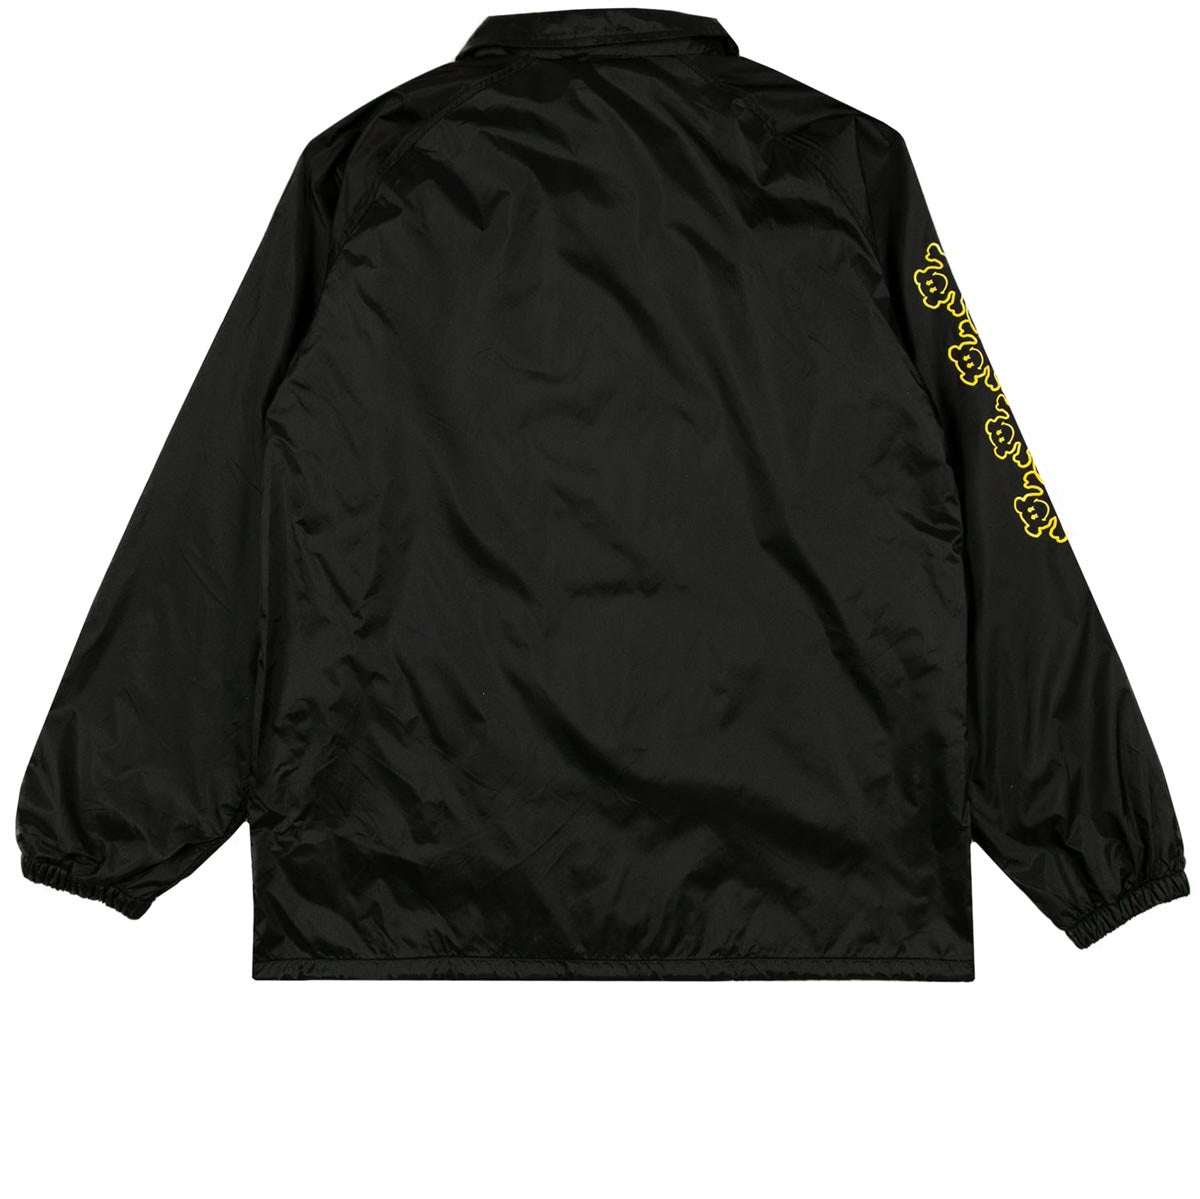 Grizzly x Smiley World Coach Jacket - Black image 4